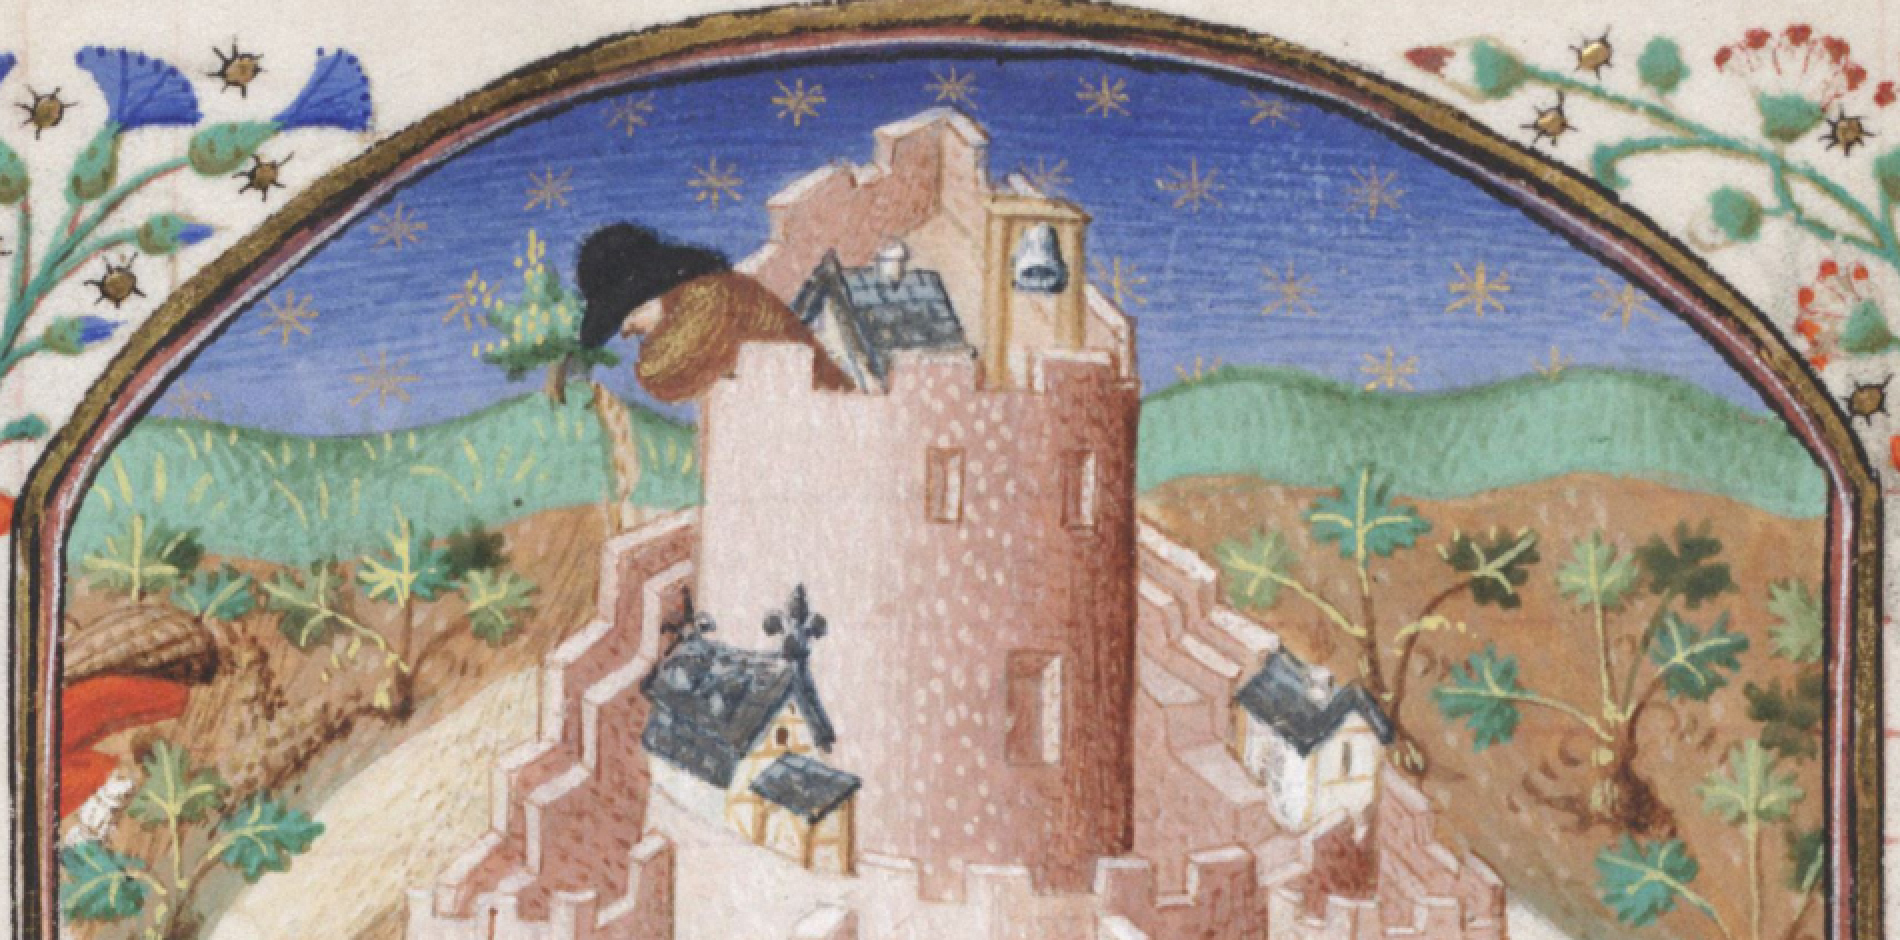 15th century illustration of a person atop a stone tower overseeing a landscape.